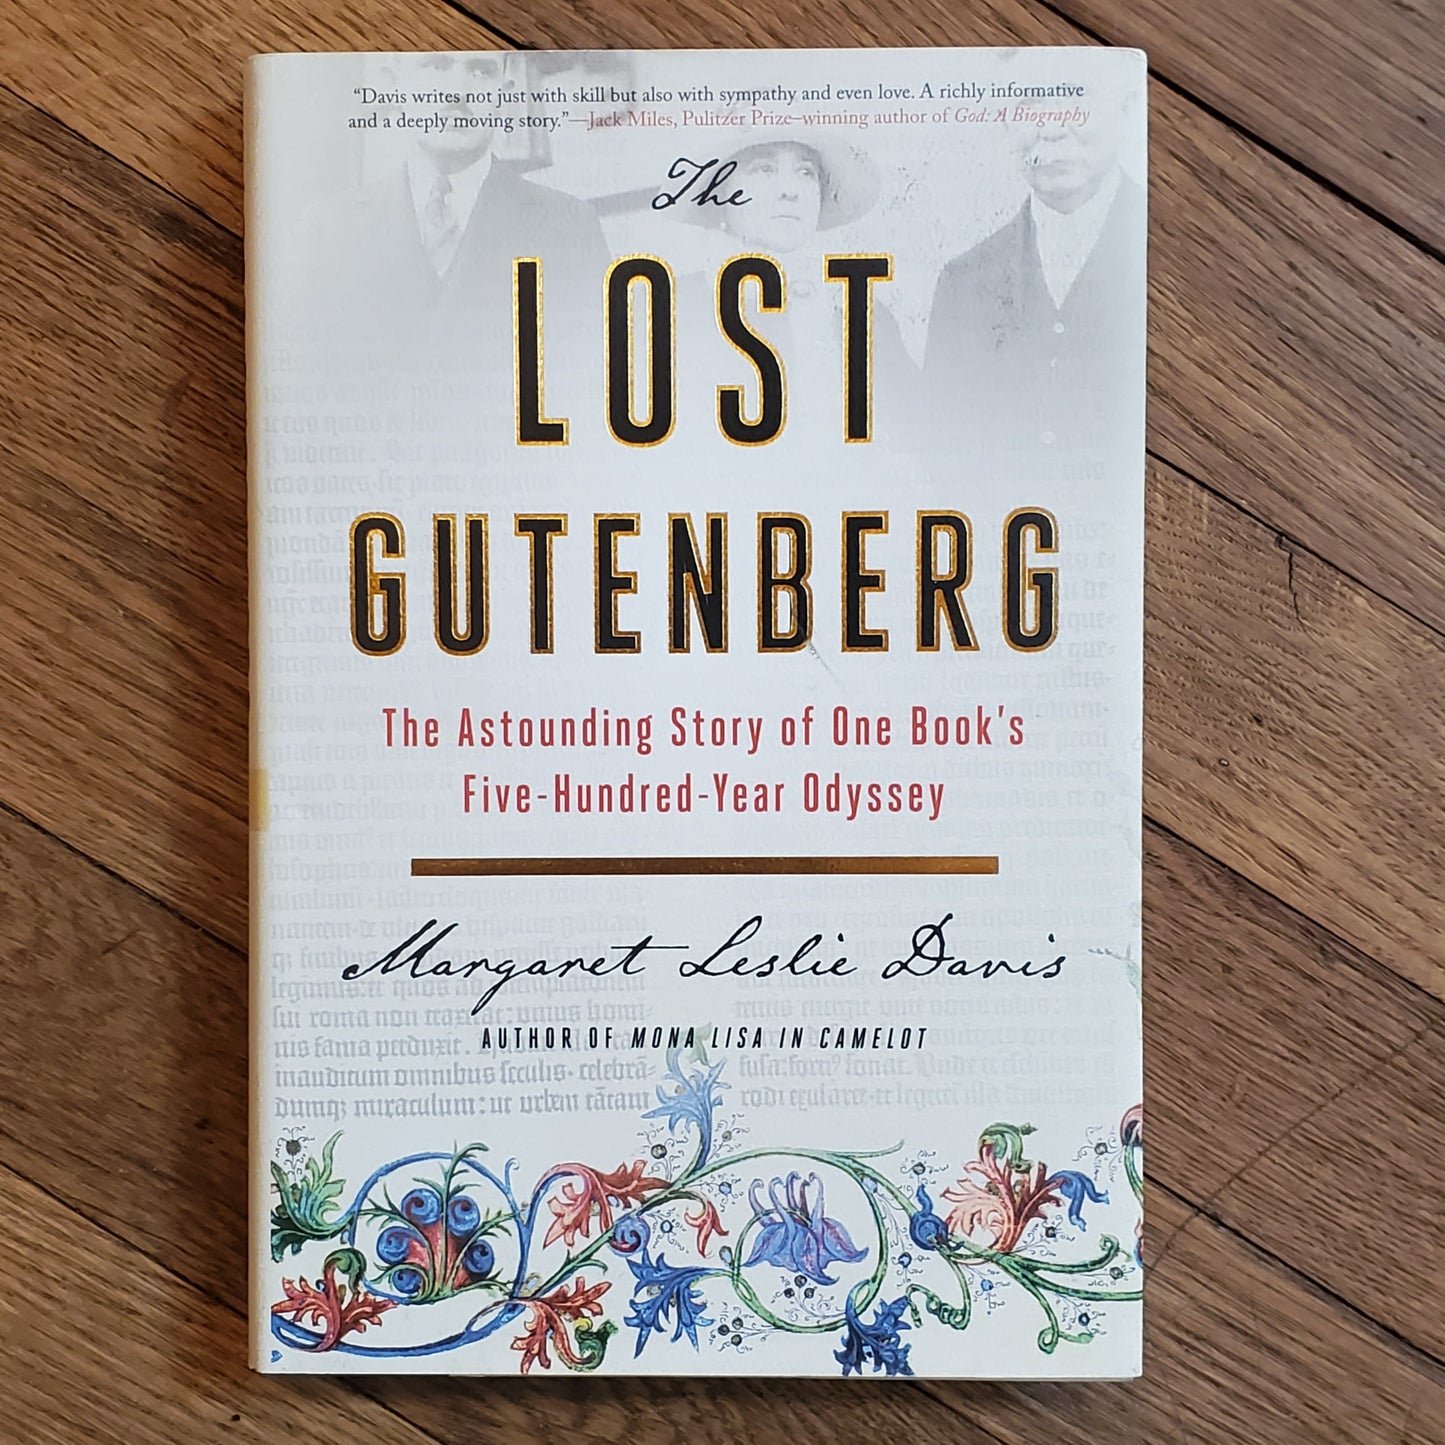 The Lost Gutenberg: The Astounding Story of One Book's Five-Hundred-Year Odyssey